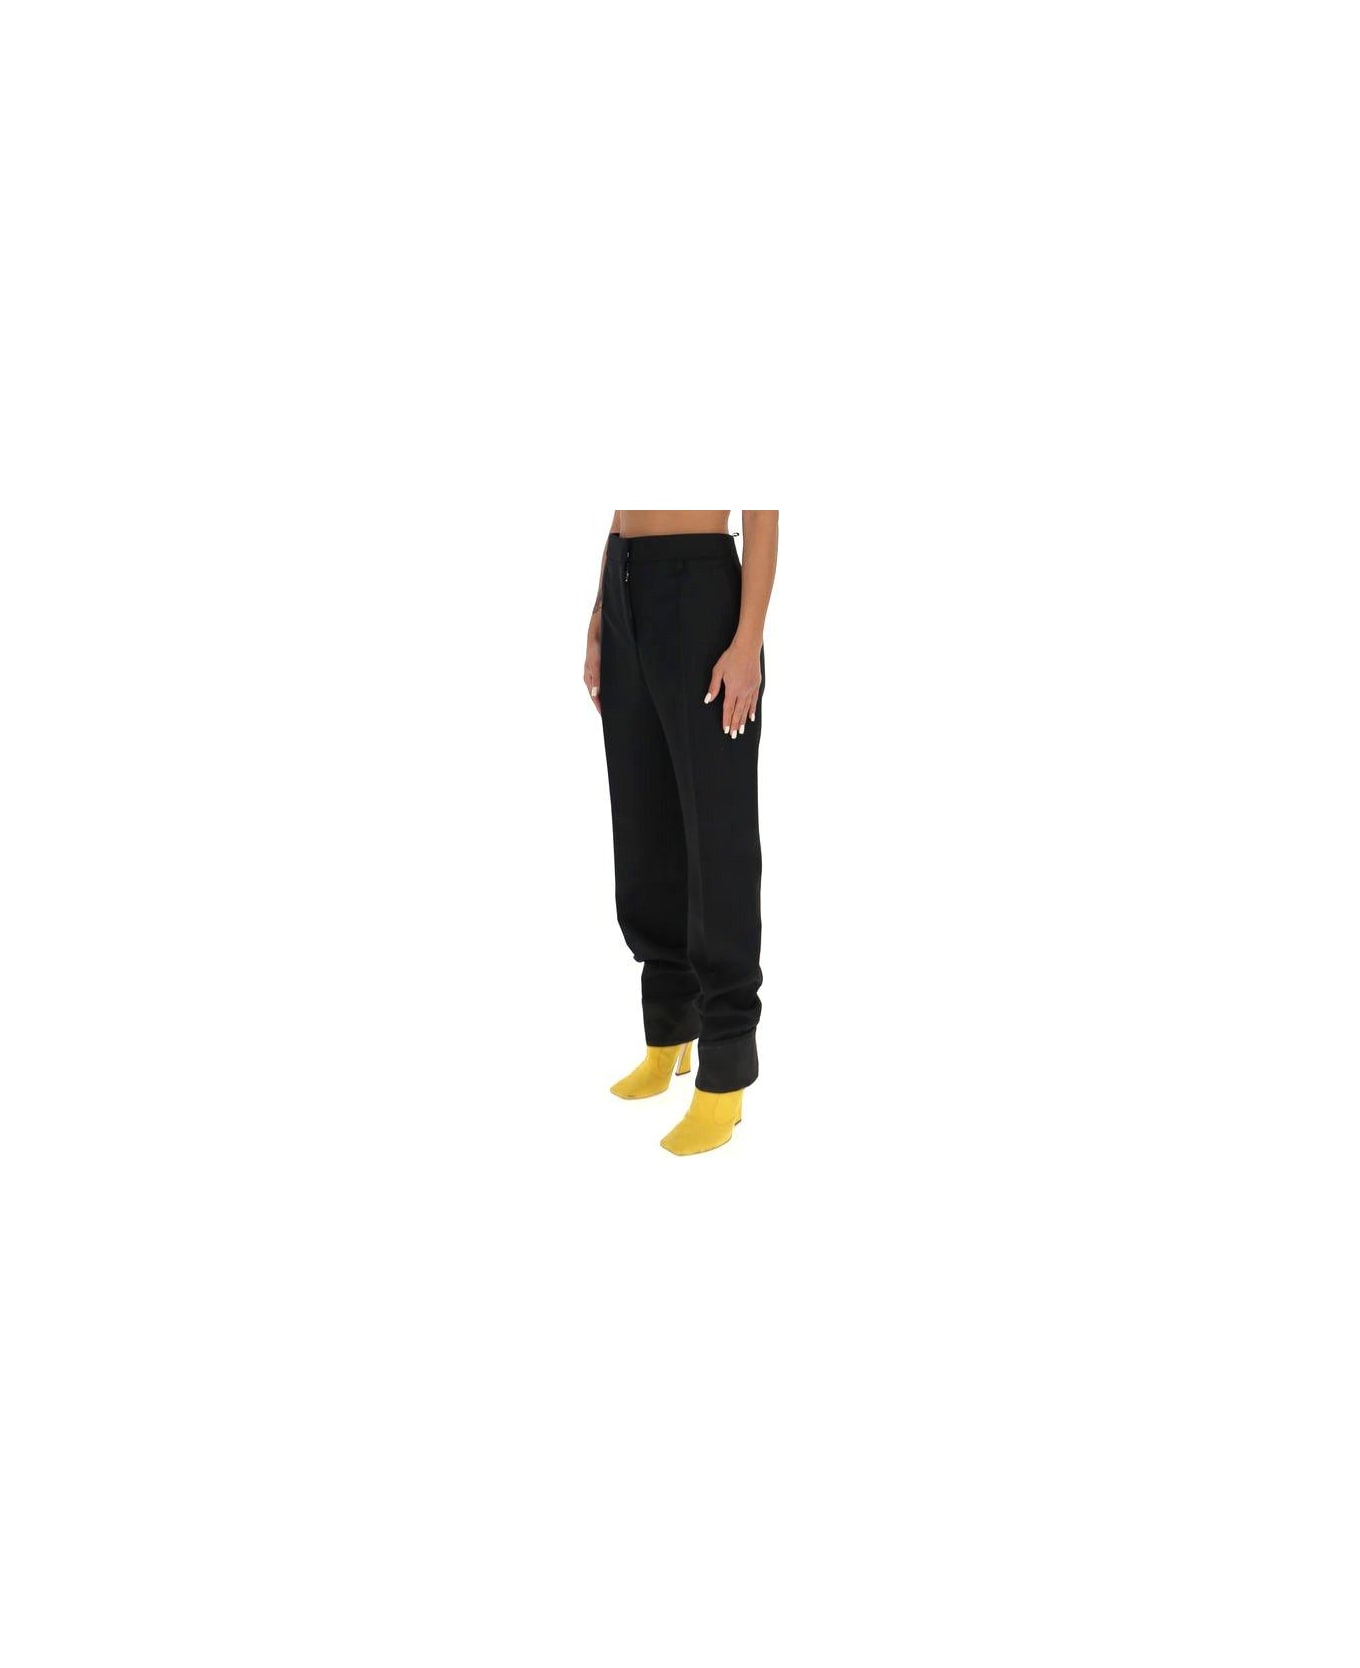 Givenchy Straight Leg Trousers - Black